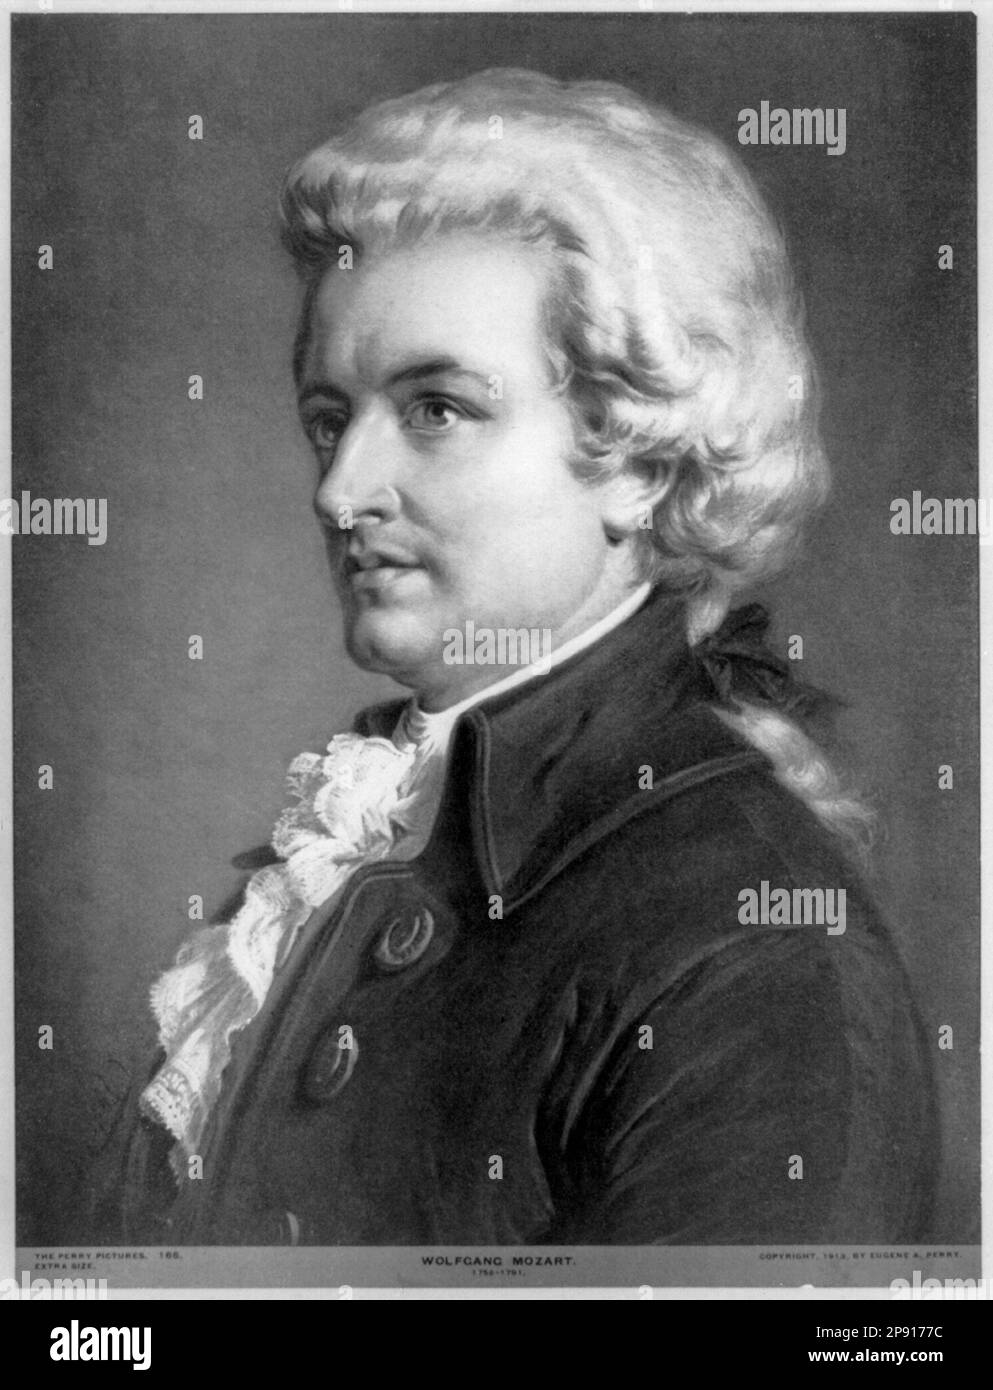 Wolfgang Amadeus Mozart (1756-1791), compositore, ritratto di Eugene A Perry, circa 1913 Foto Stock